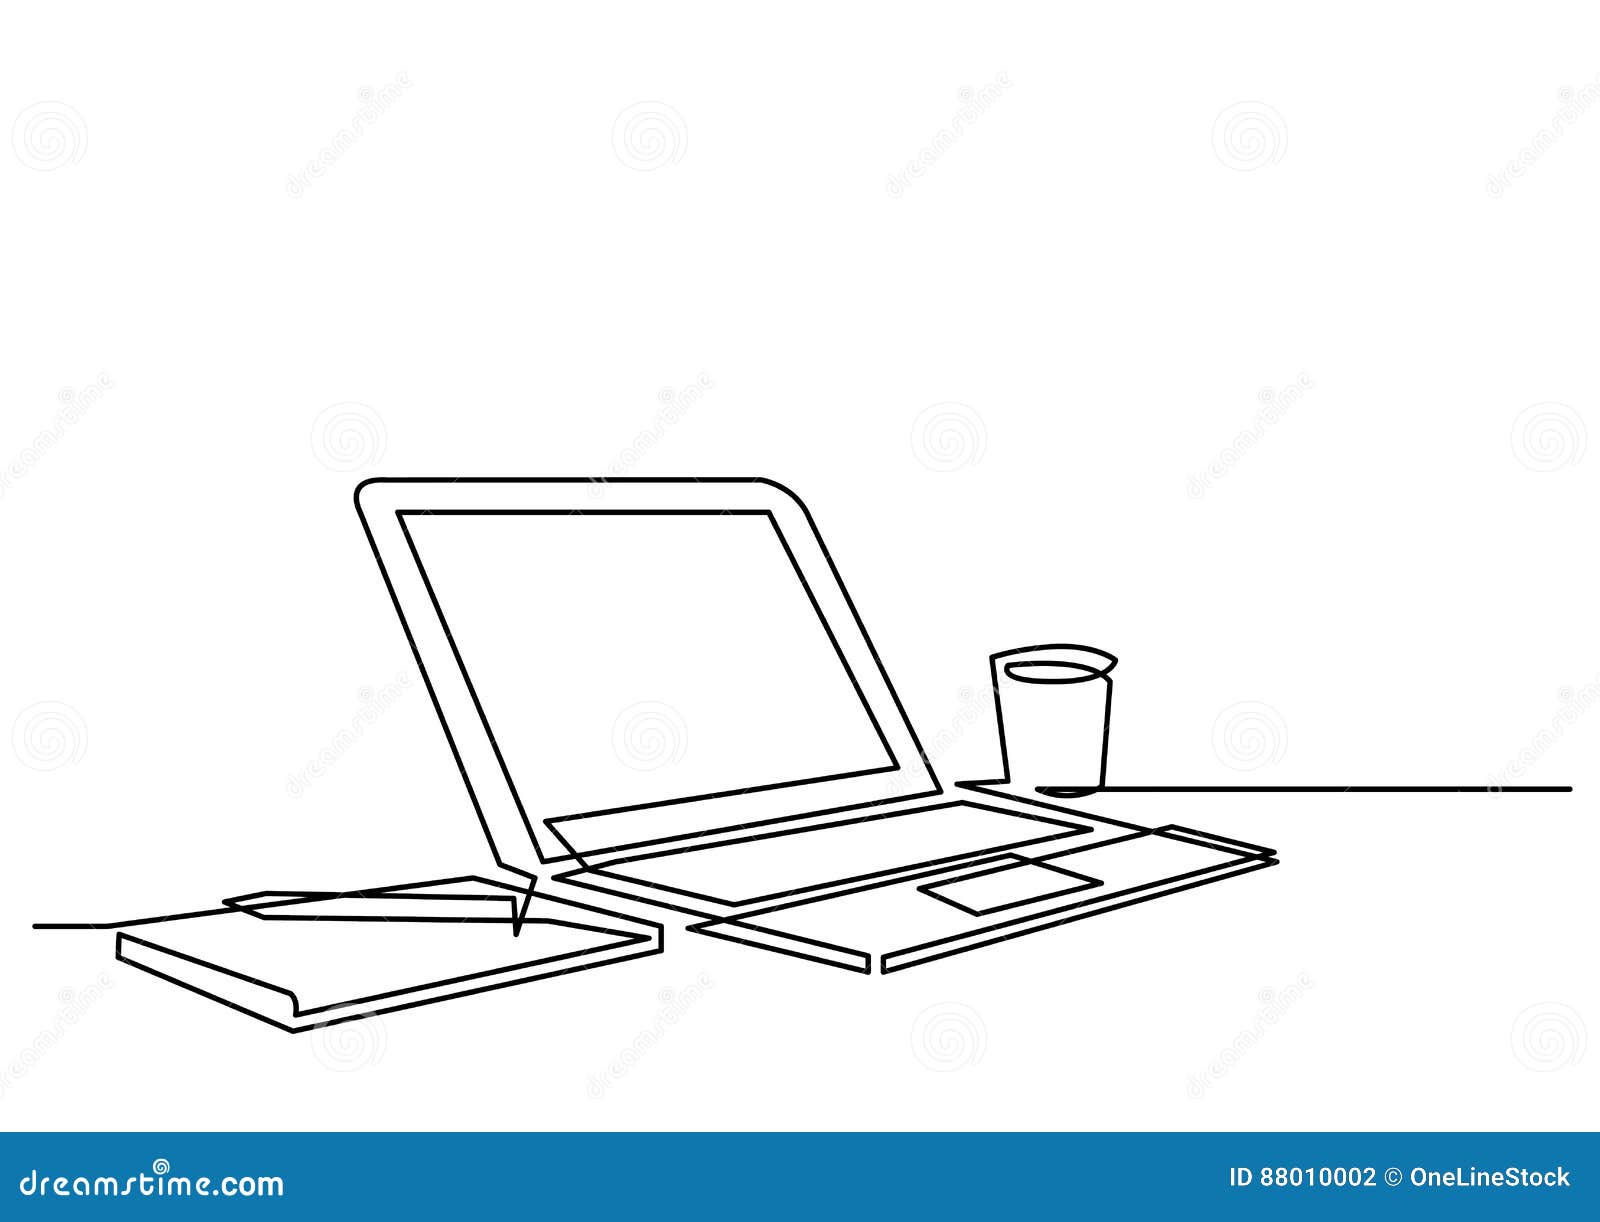 Continuous Line Drawing Of Desk Laptop Computer Pen Stock Vector